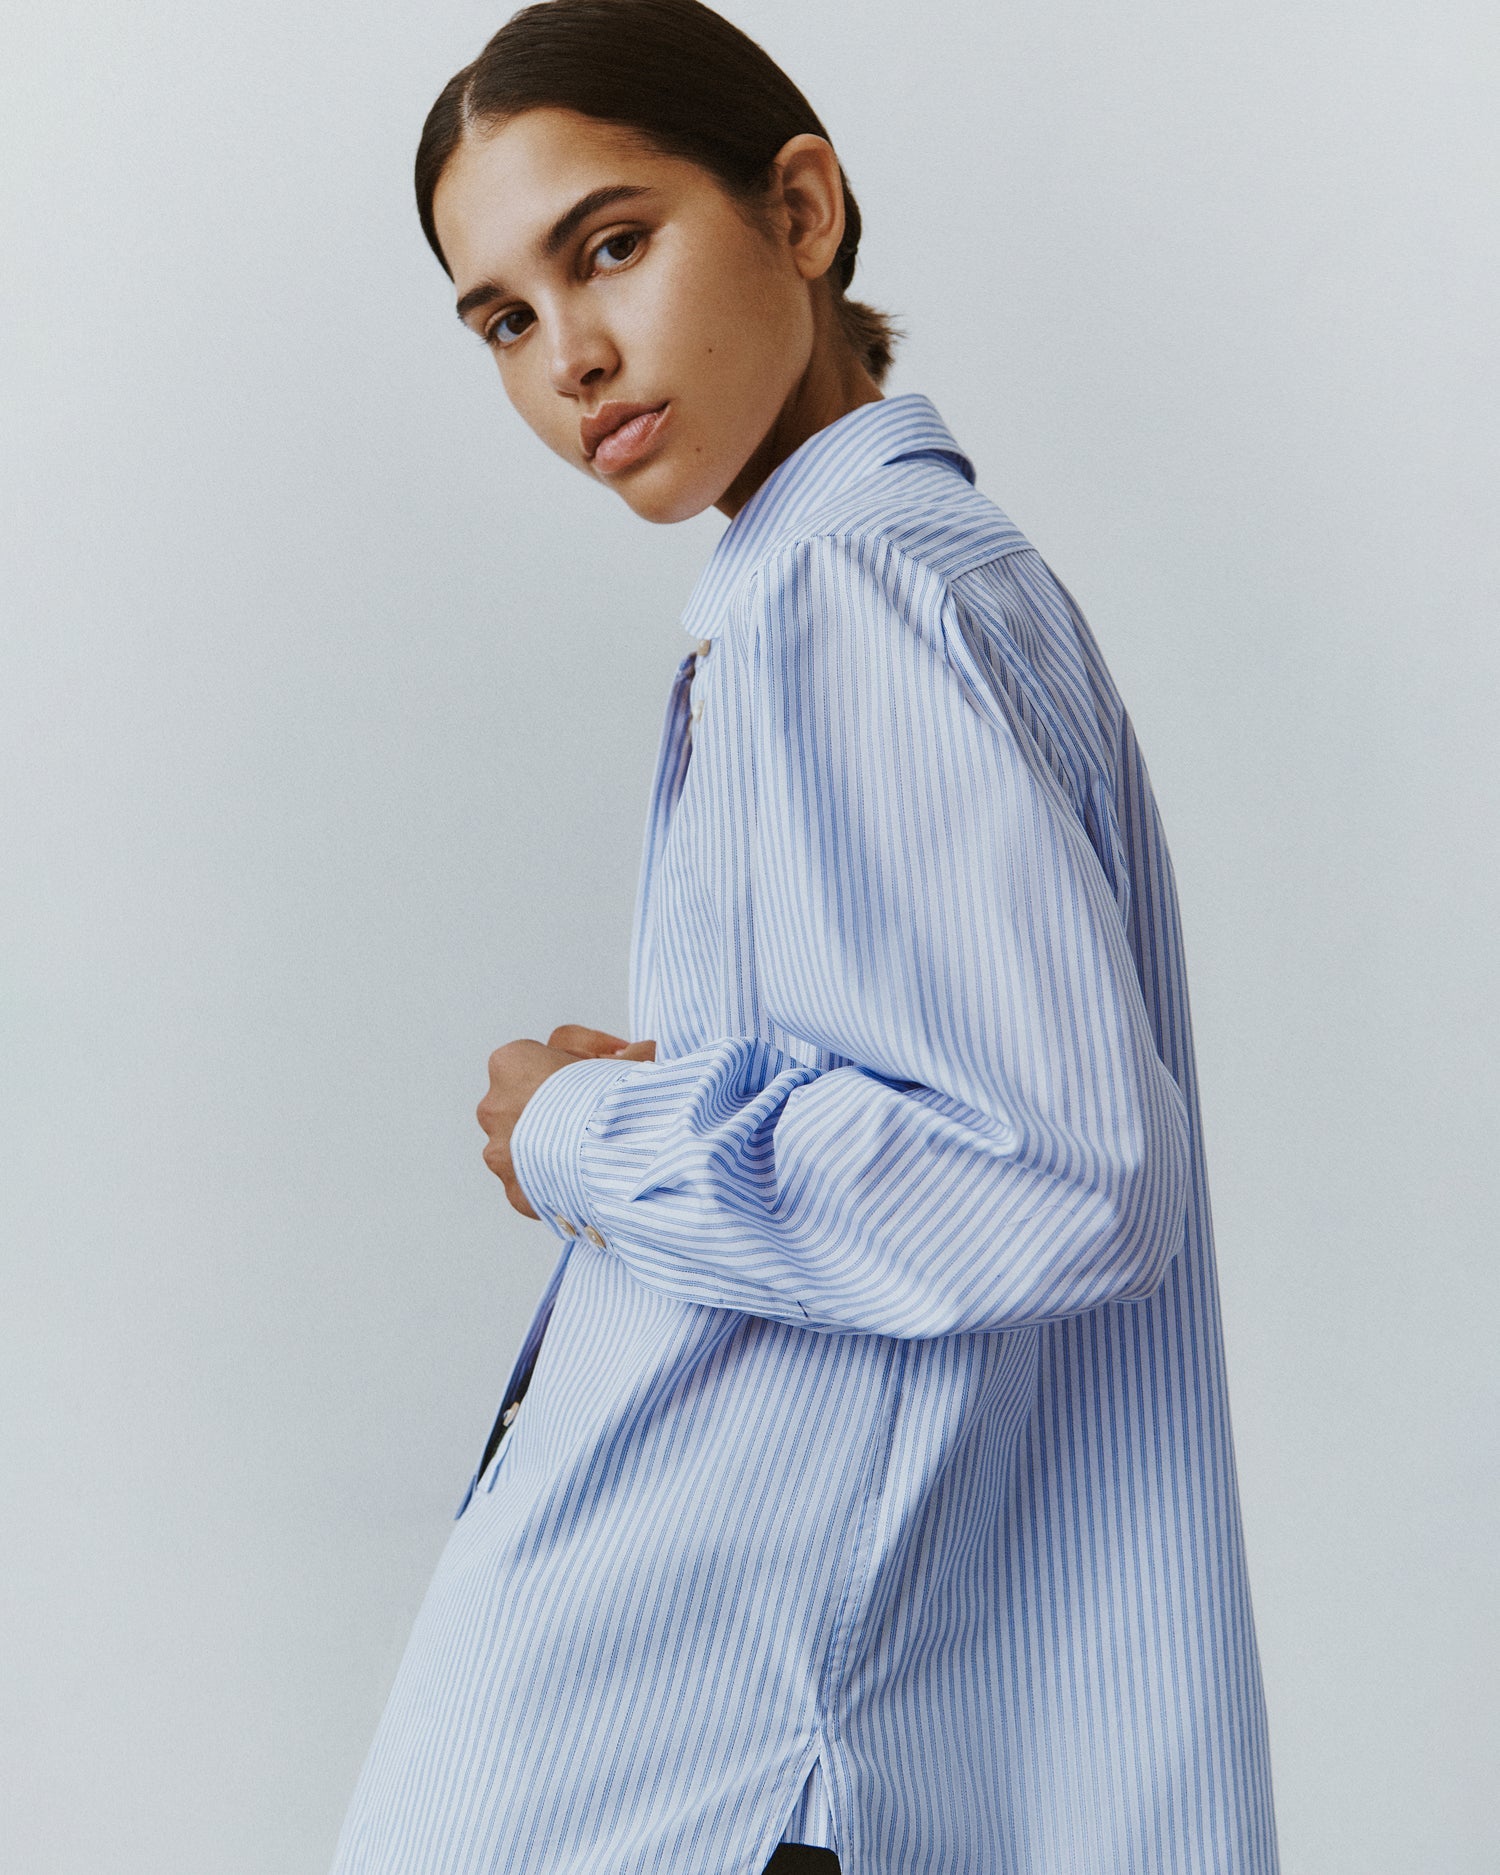 A brunette woman faces away from the camera wearing a striped white button down with an oversized menswear silhouette.